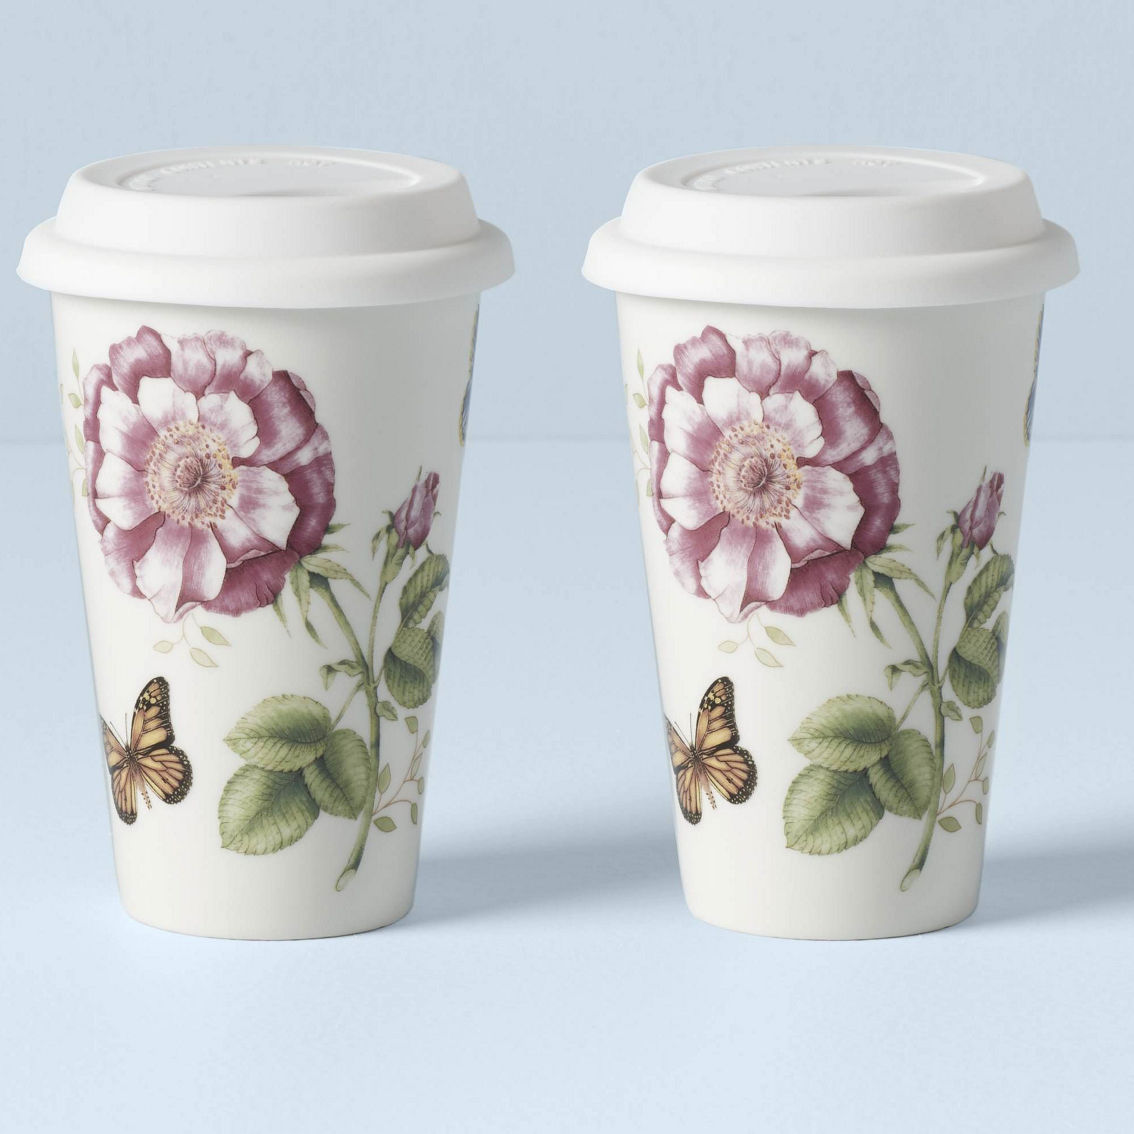 Lenox Butterfly Meadow Thermal Travel Mugs 2 pk. - Image 2 of 3